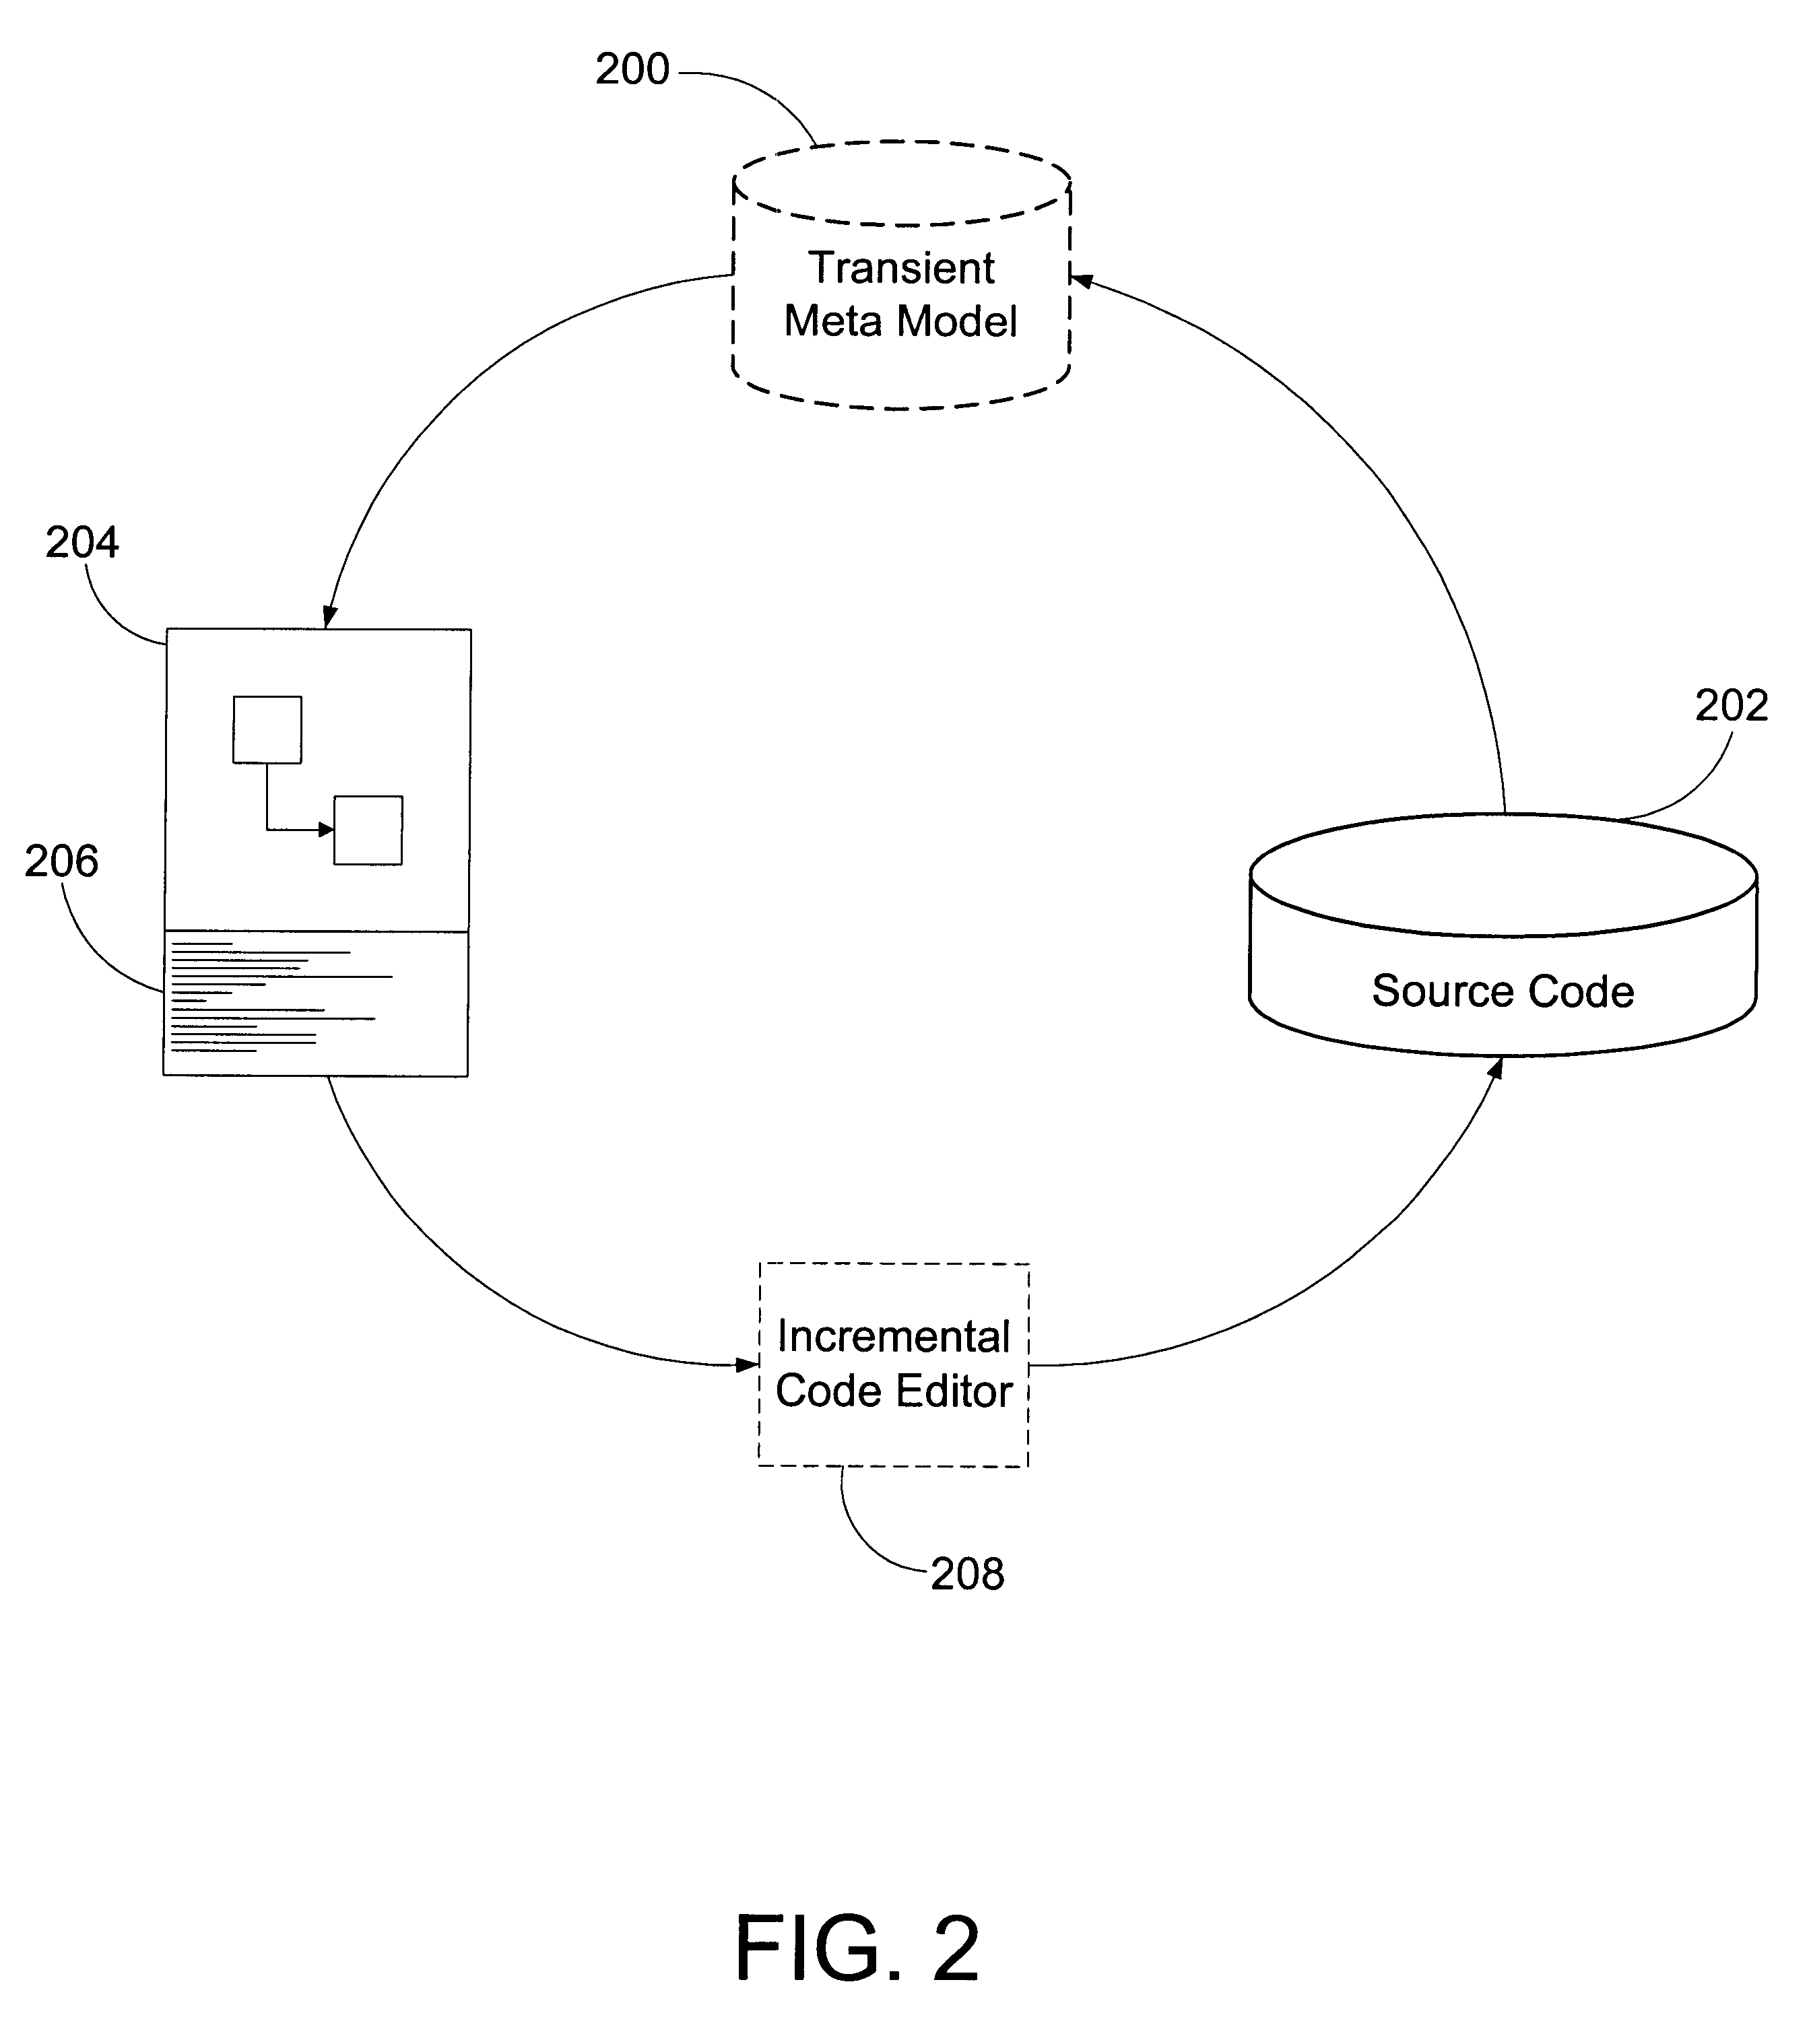 Software development tool with instant updating and simultaneous view of graphical and a textual display of source code